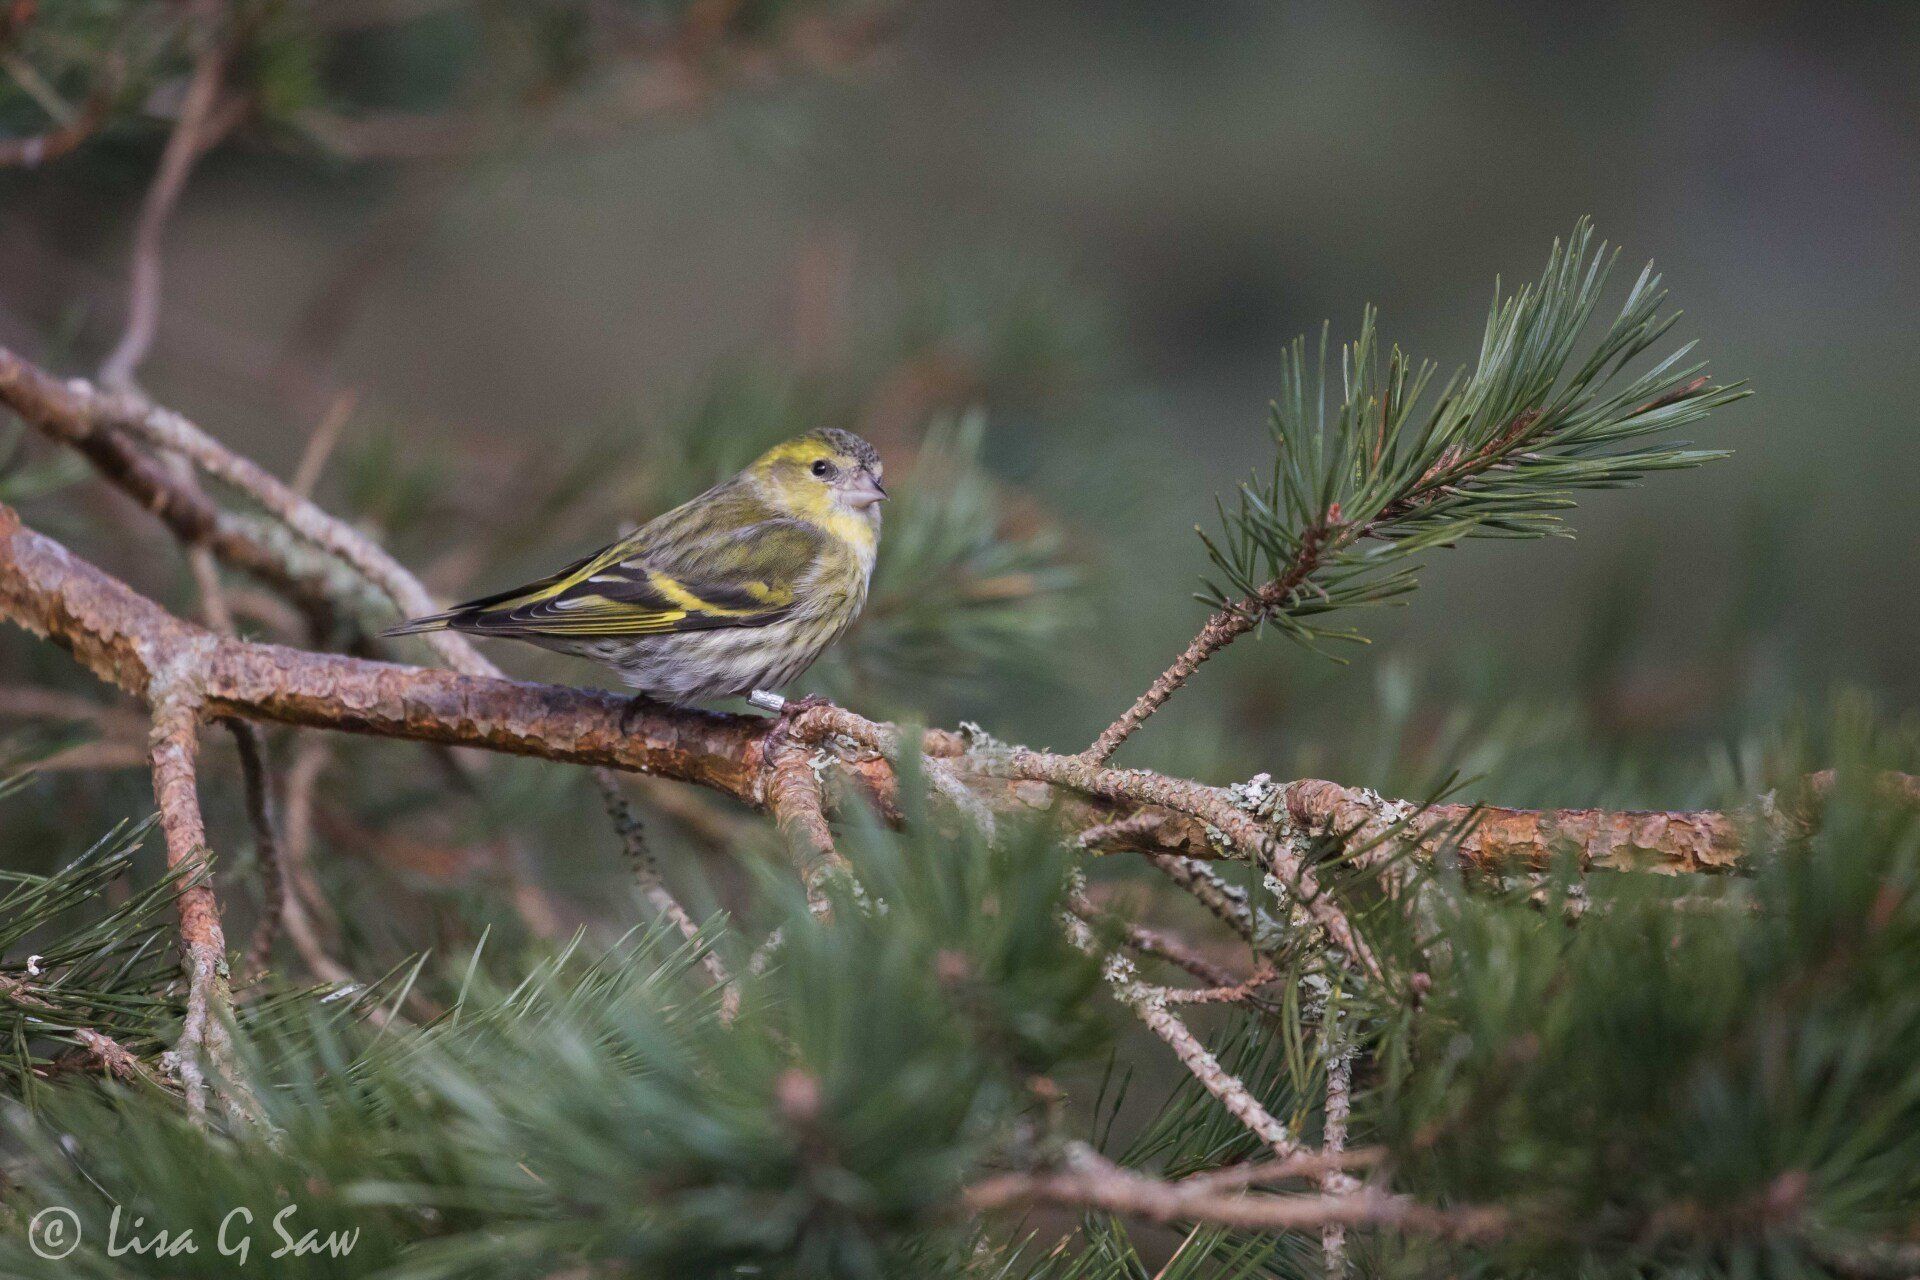 Female Siskin perched on pine tree branch with ring tag